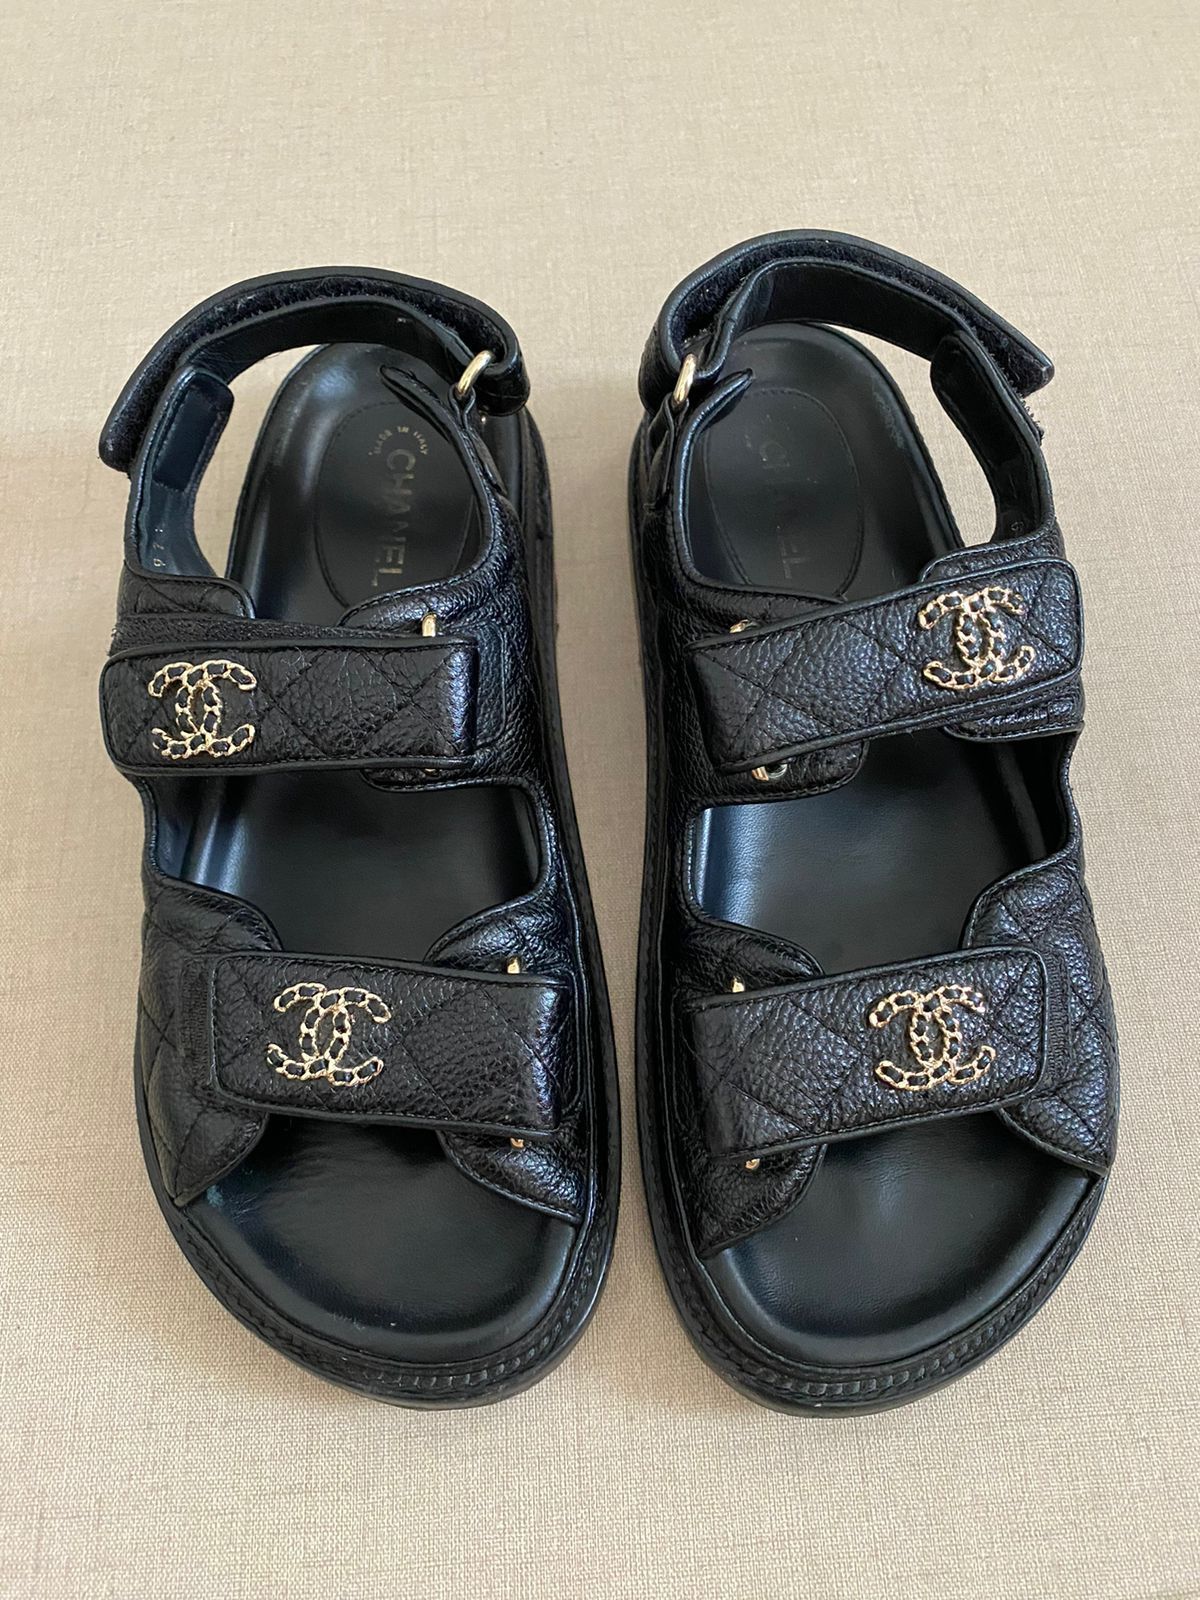 Channel Sandals for Sale in Silver Spring, MD - OfferUp